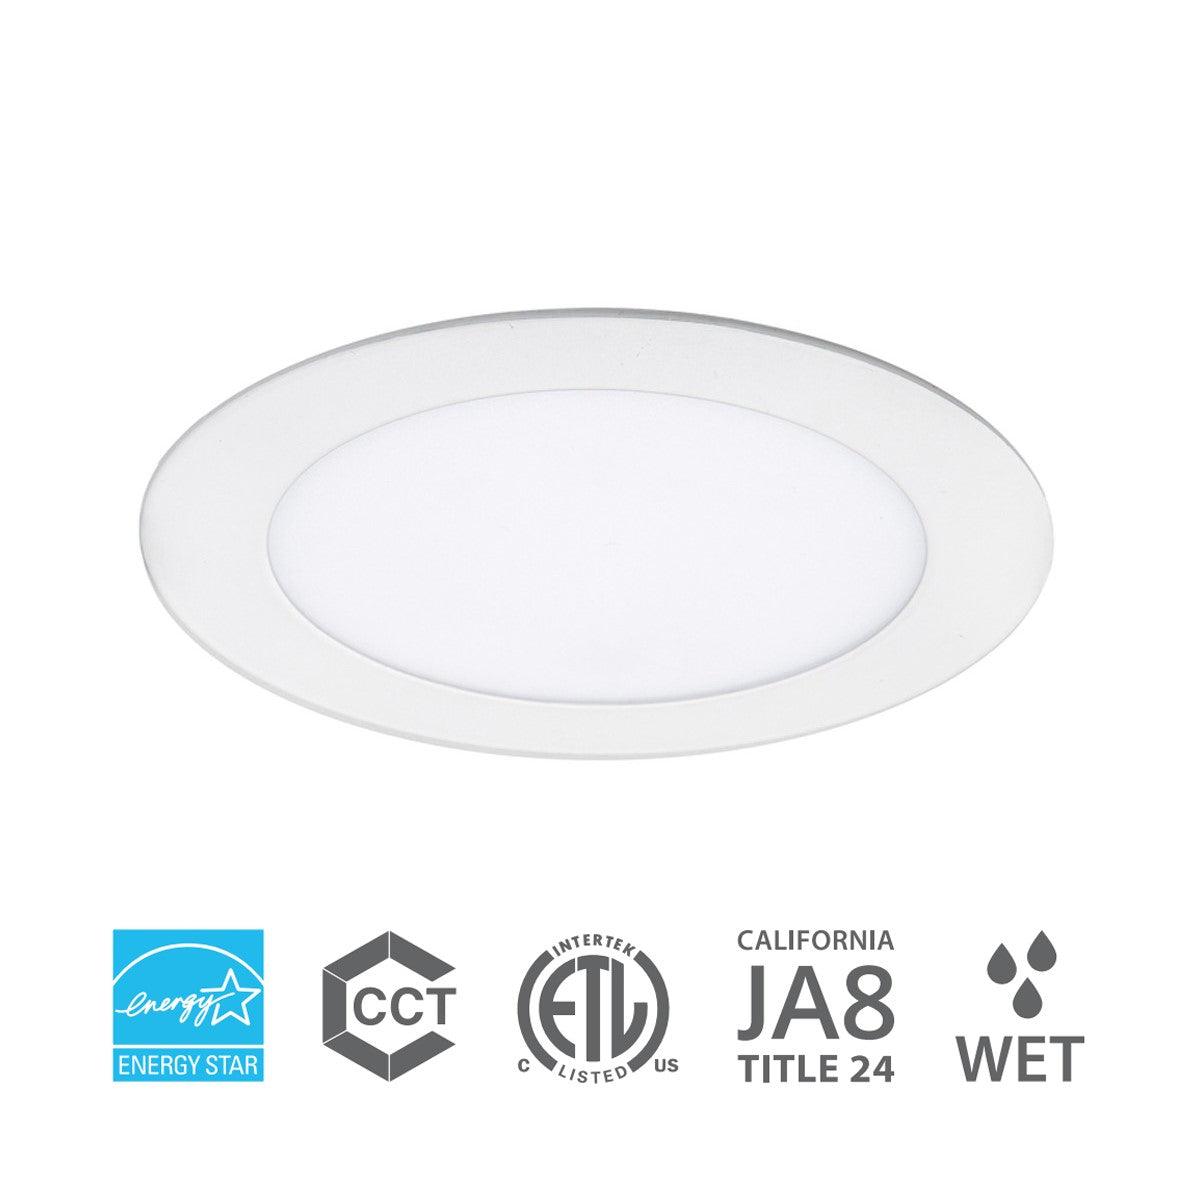 6 In. Lotos LED Canless LED Recessed Light, 12 Watt, 1200 Lumens, Selectable CCT, 2700K to 5000K, 120/277V